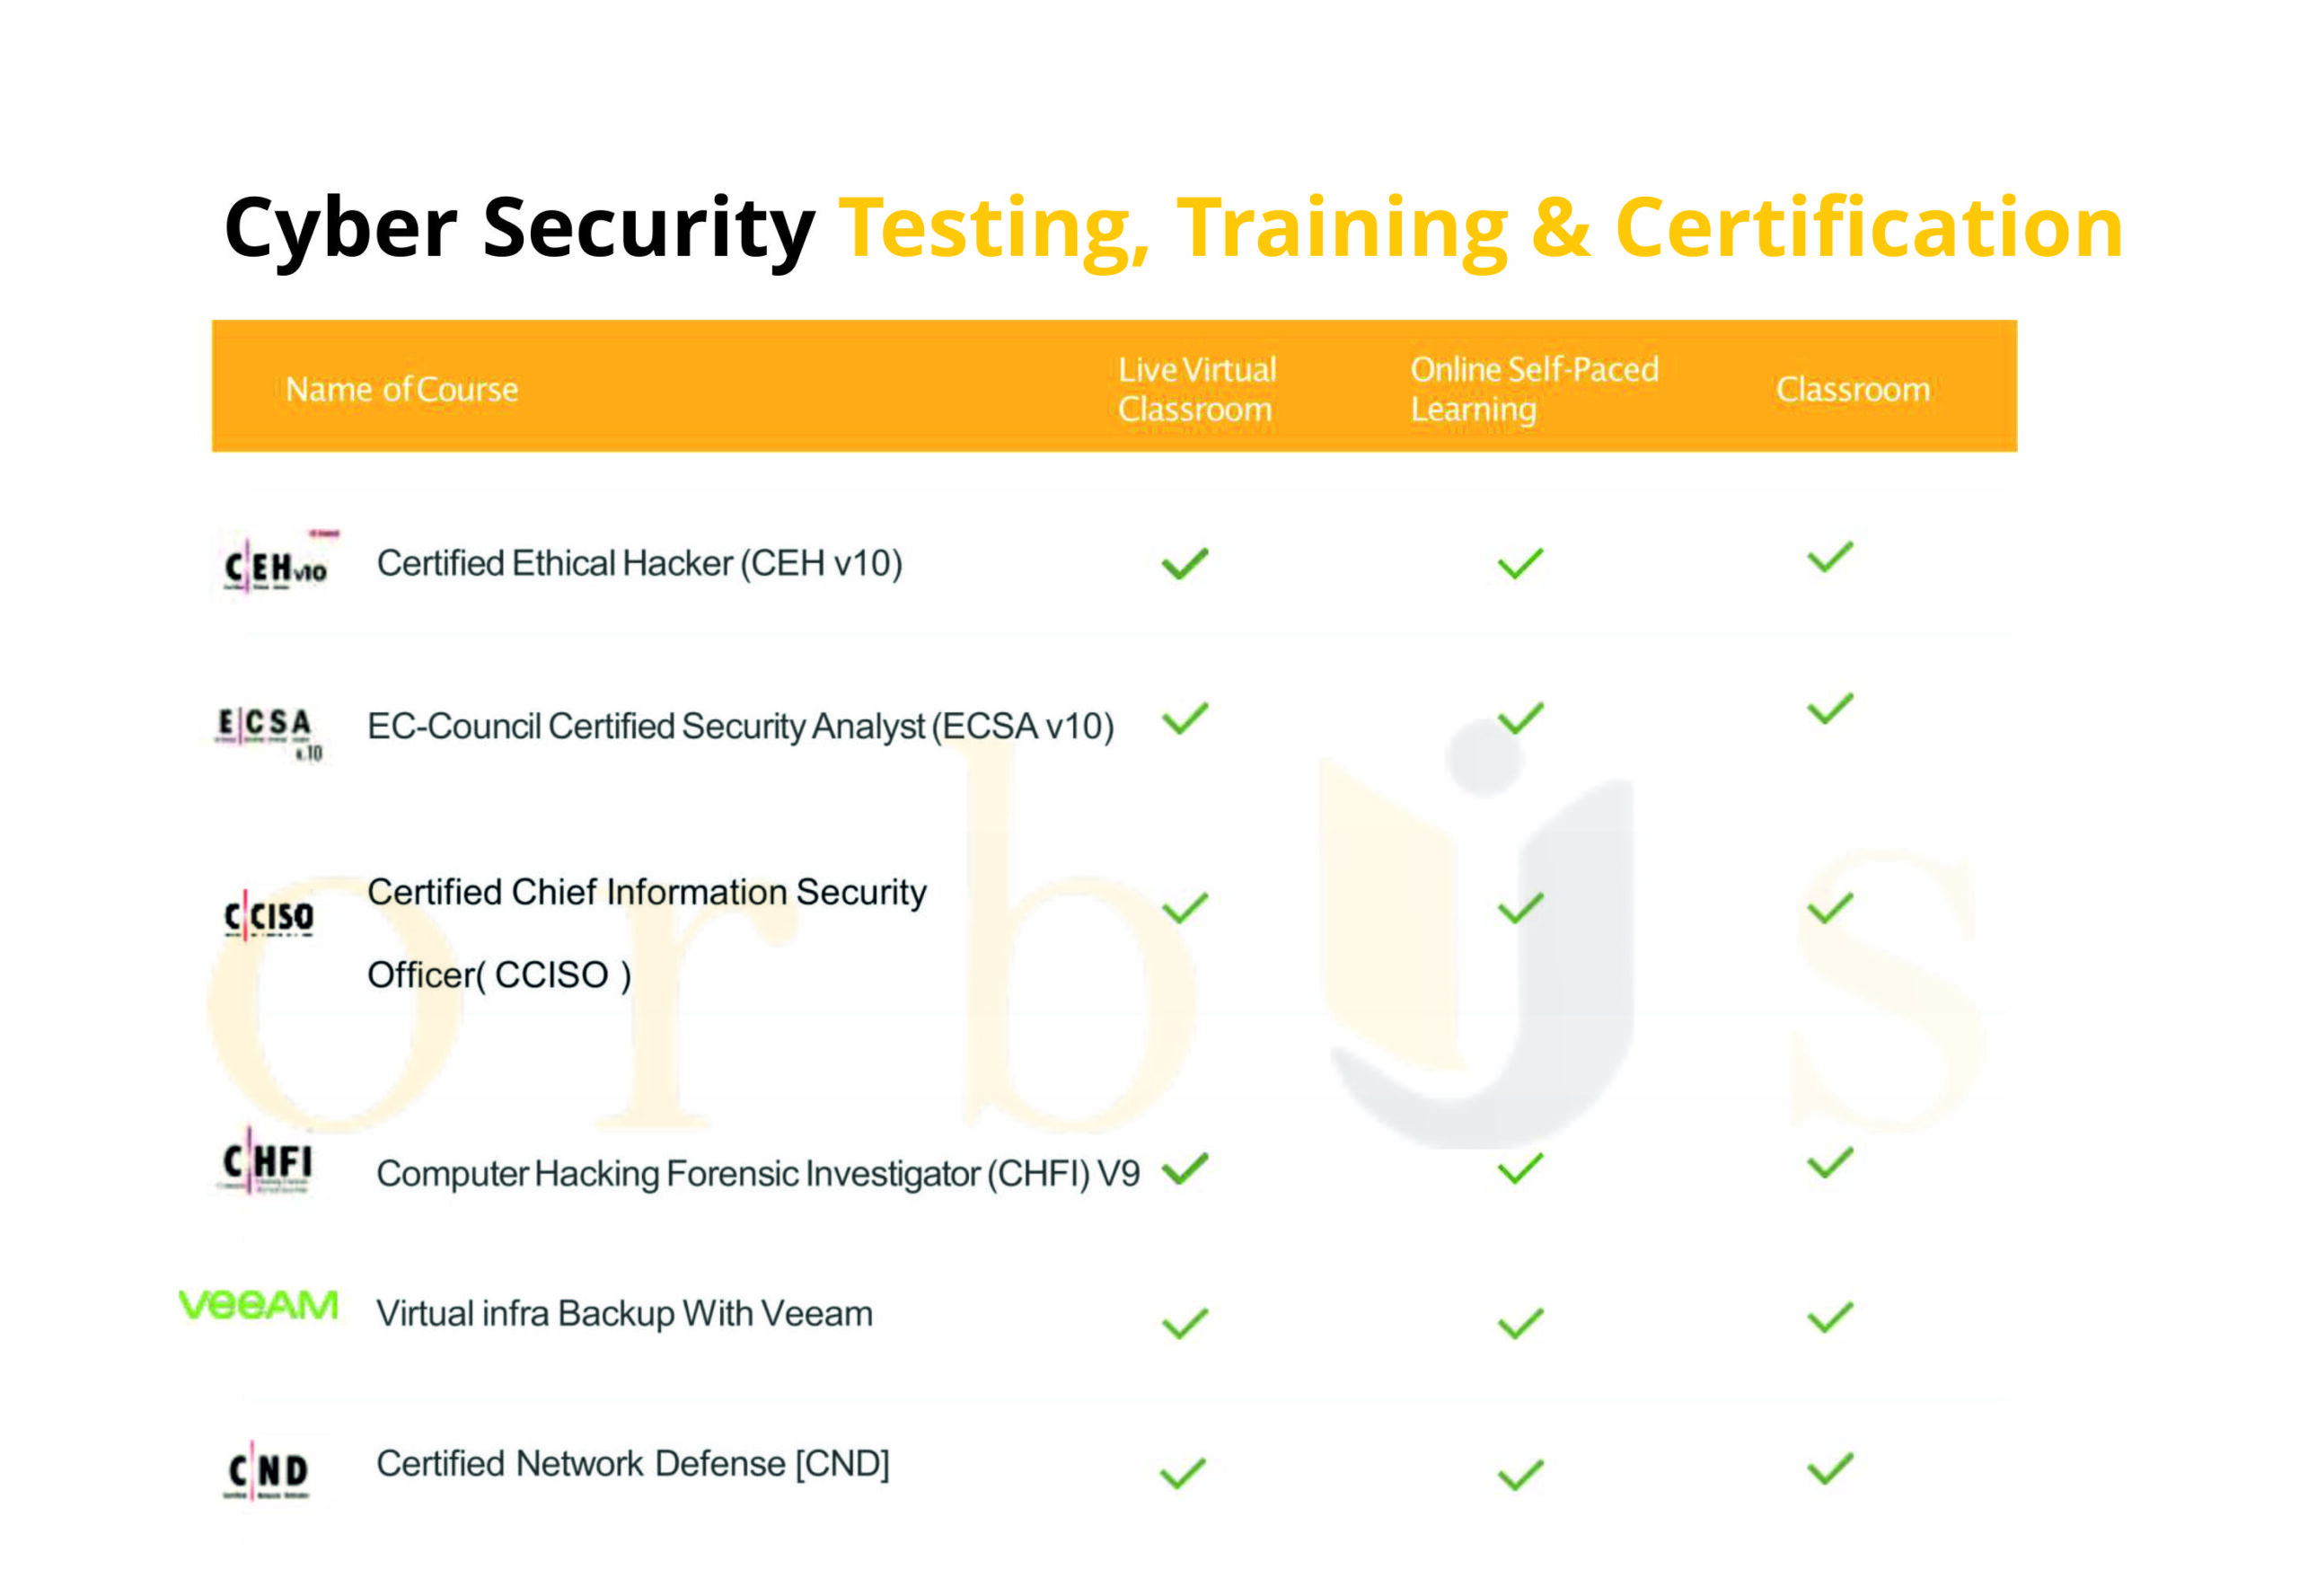 Cyber Security Testing, Training & Certification